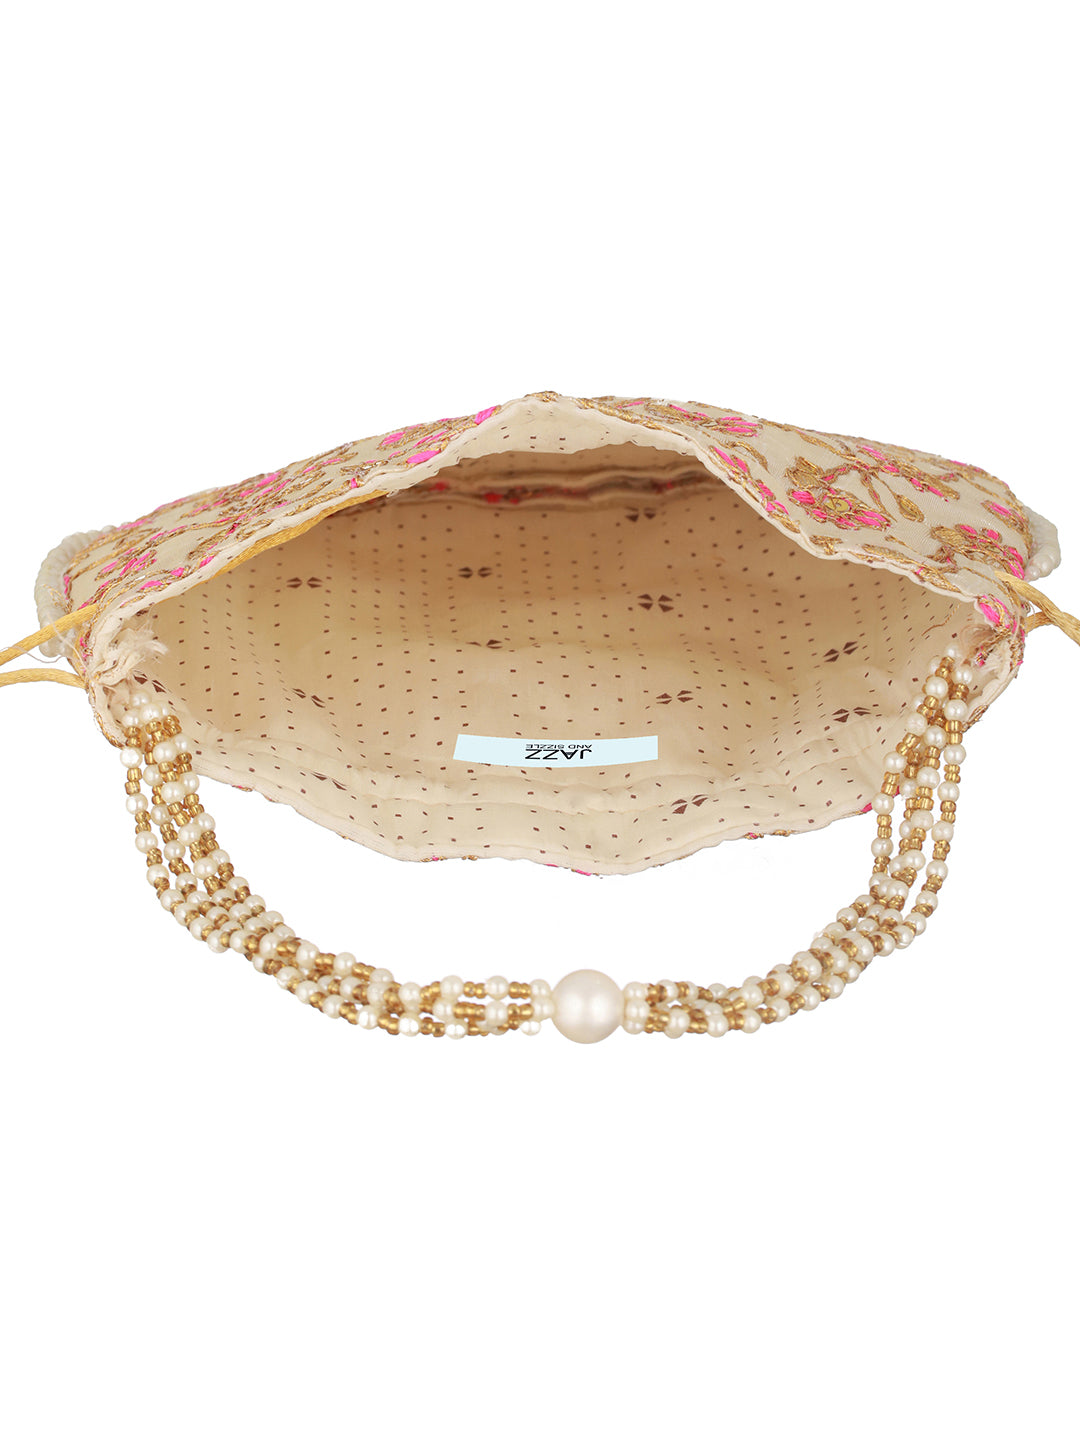 Pink & Gold-Toned with Rich Embroidered Potli Clutch - Jazzandsizzle